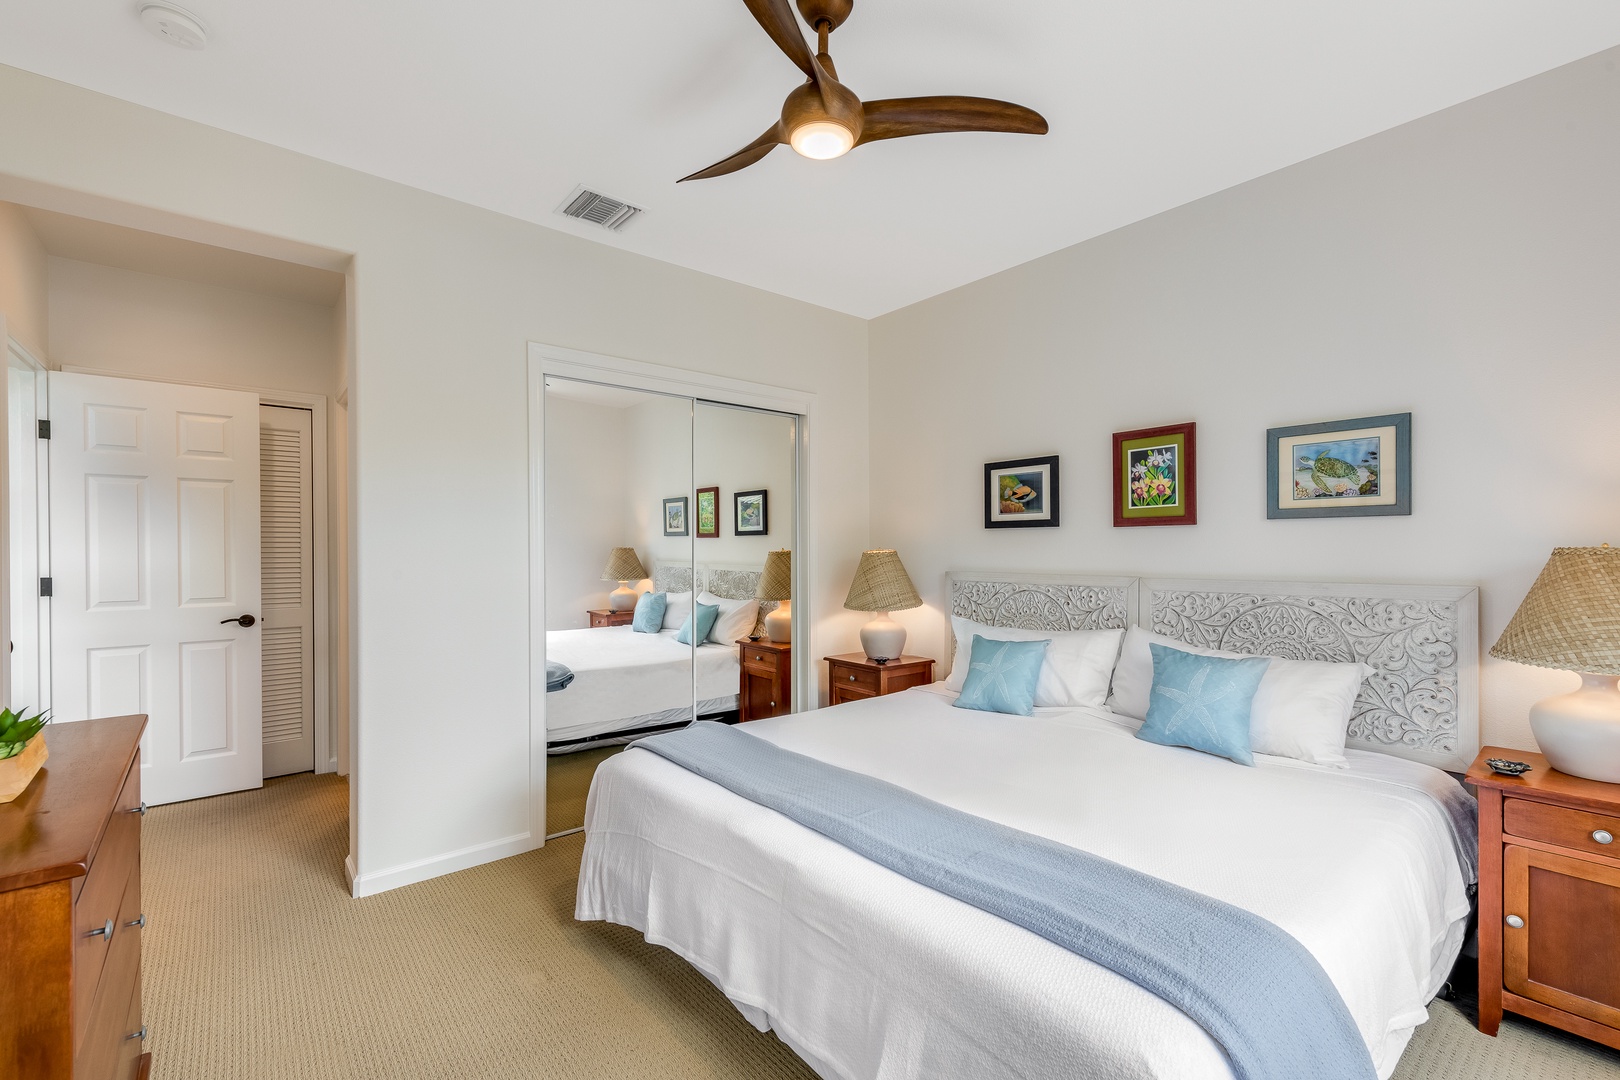 Kamuela Vacation Rentals, Mauna Lani Fairways #603 - Guest suite showing King bed conversion